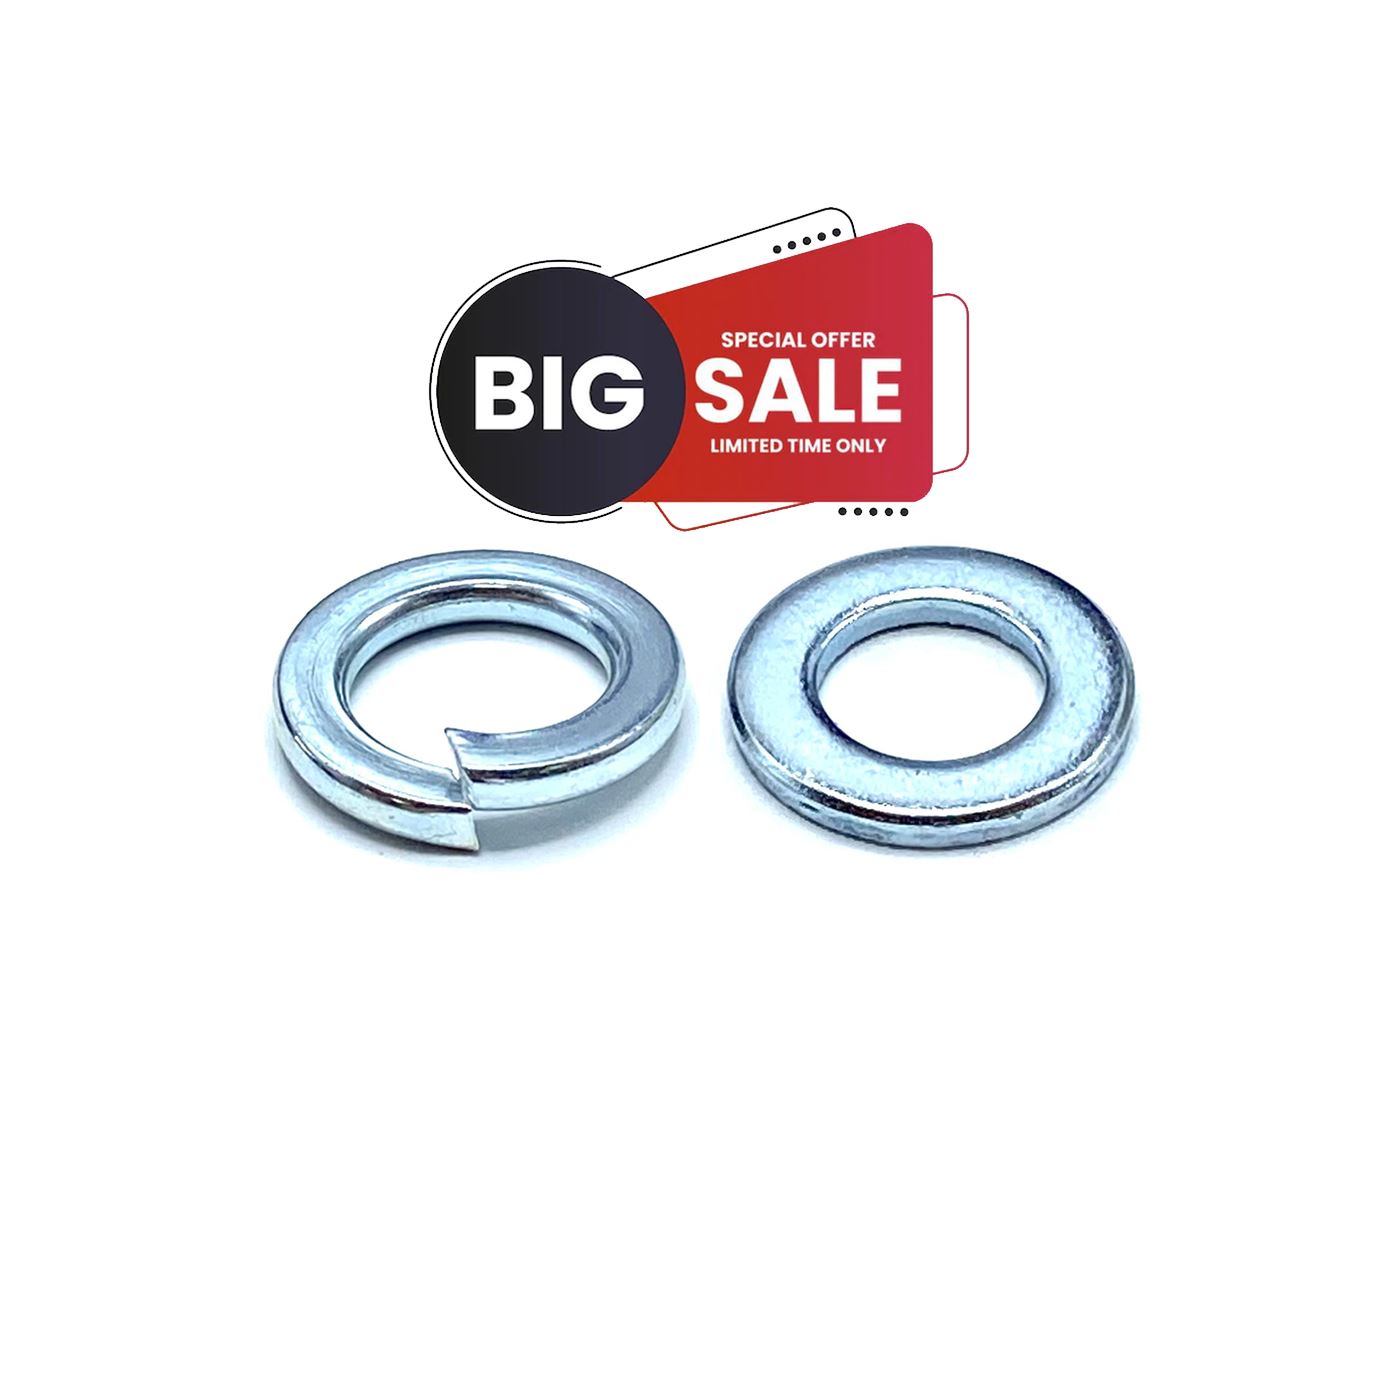 Excellerations Metal Washers - 2 lbs. 169102